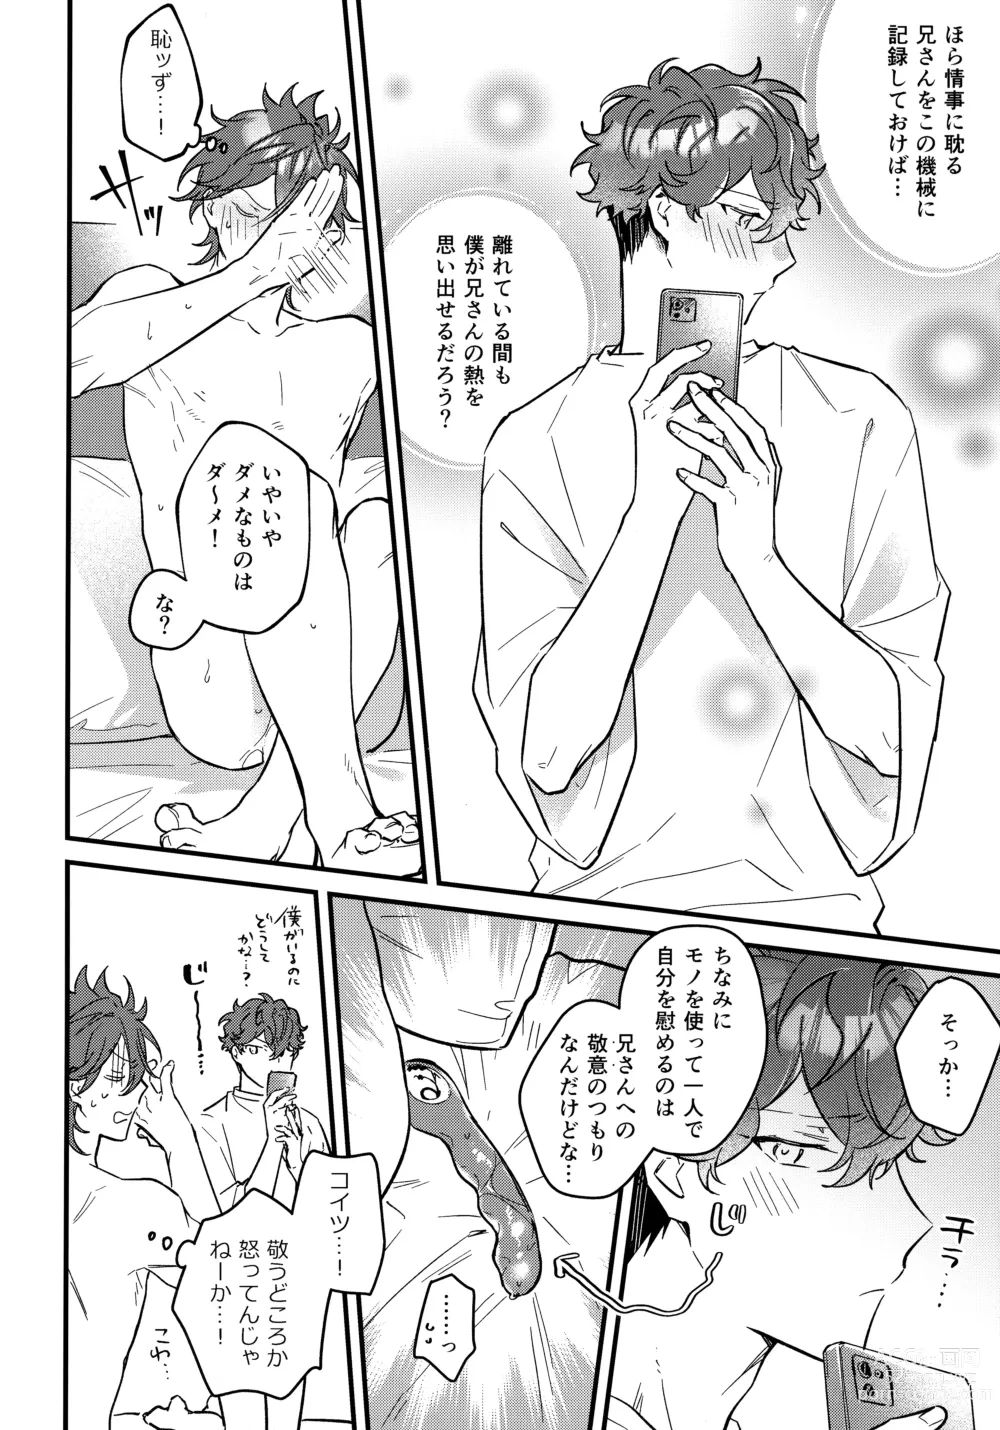 Page 9 of doujinshi H.M.D.R.